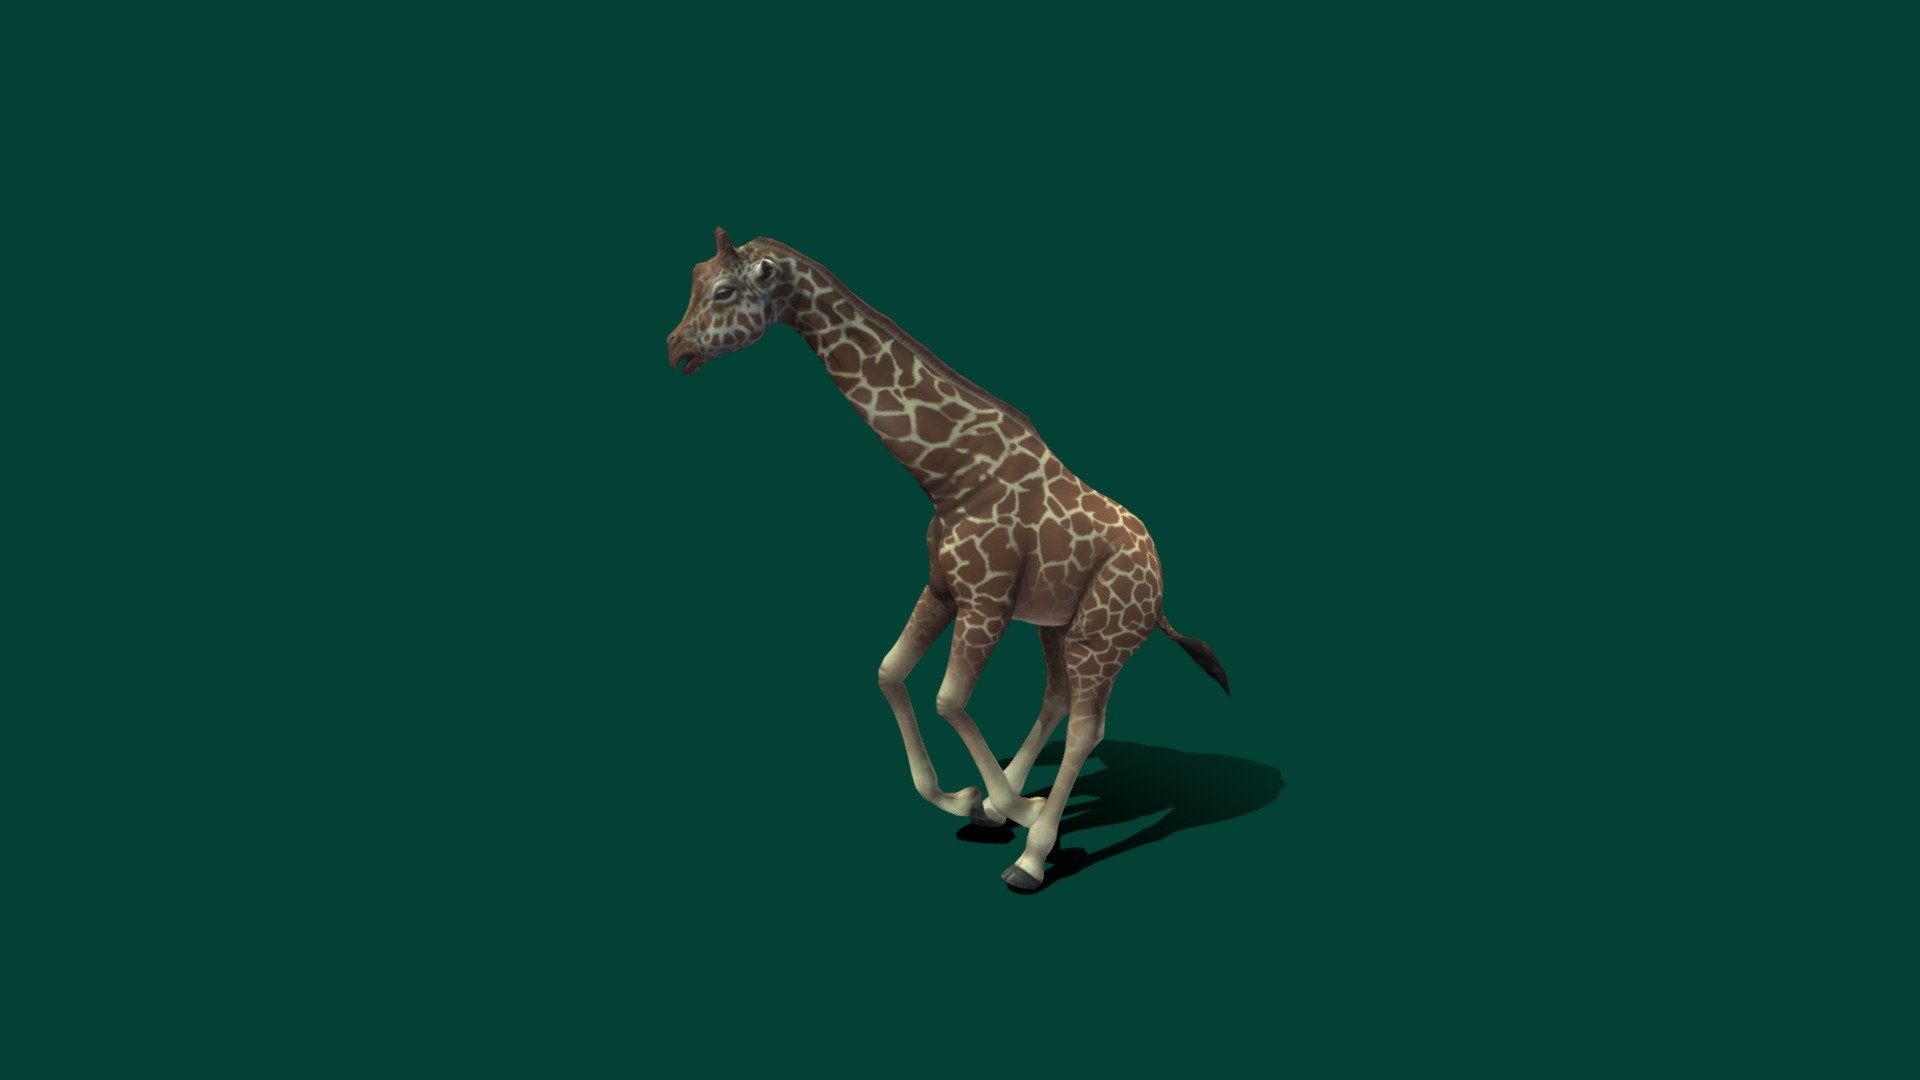 Giraffe Game Ready Low Poly
11x animationsunreal compatible  and 4K Texures 

Diffuse Color 
Metallic
Roughness
Normal Map 

idle 
idle 2 
idle to walk 
idle to run
drink 
drink start 
drink end
eat start
eat end
walk forward
canter forward

The giraffe is a large African hoofed mammal belonging to the genus Giraffa. It is the tallest living terrestrial animal and the largest ruminant on Earth. Traditionally, giraffes were thought to be one species, Giraffa camelopardalis, with nine subspecies 3d model